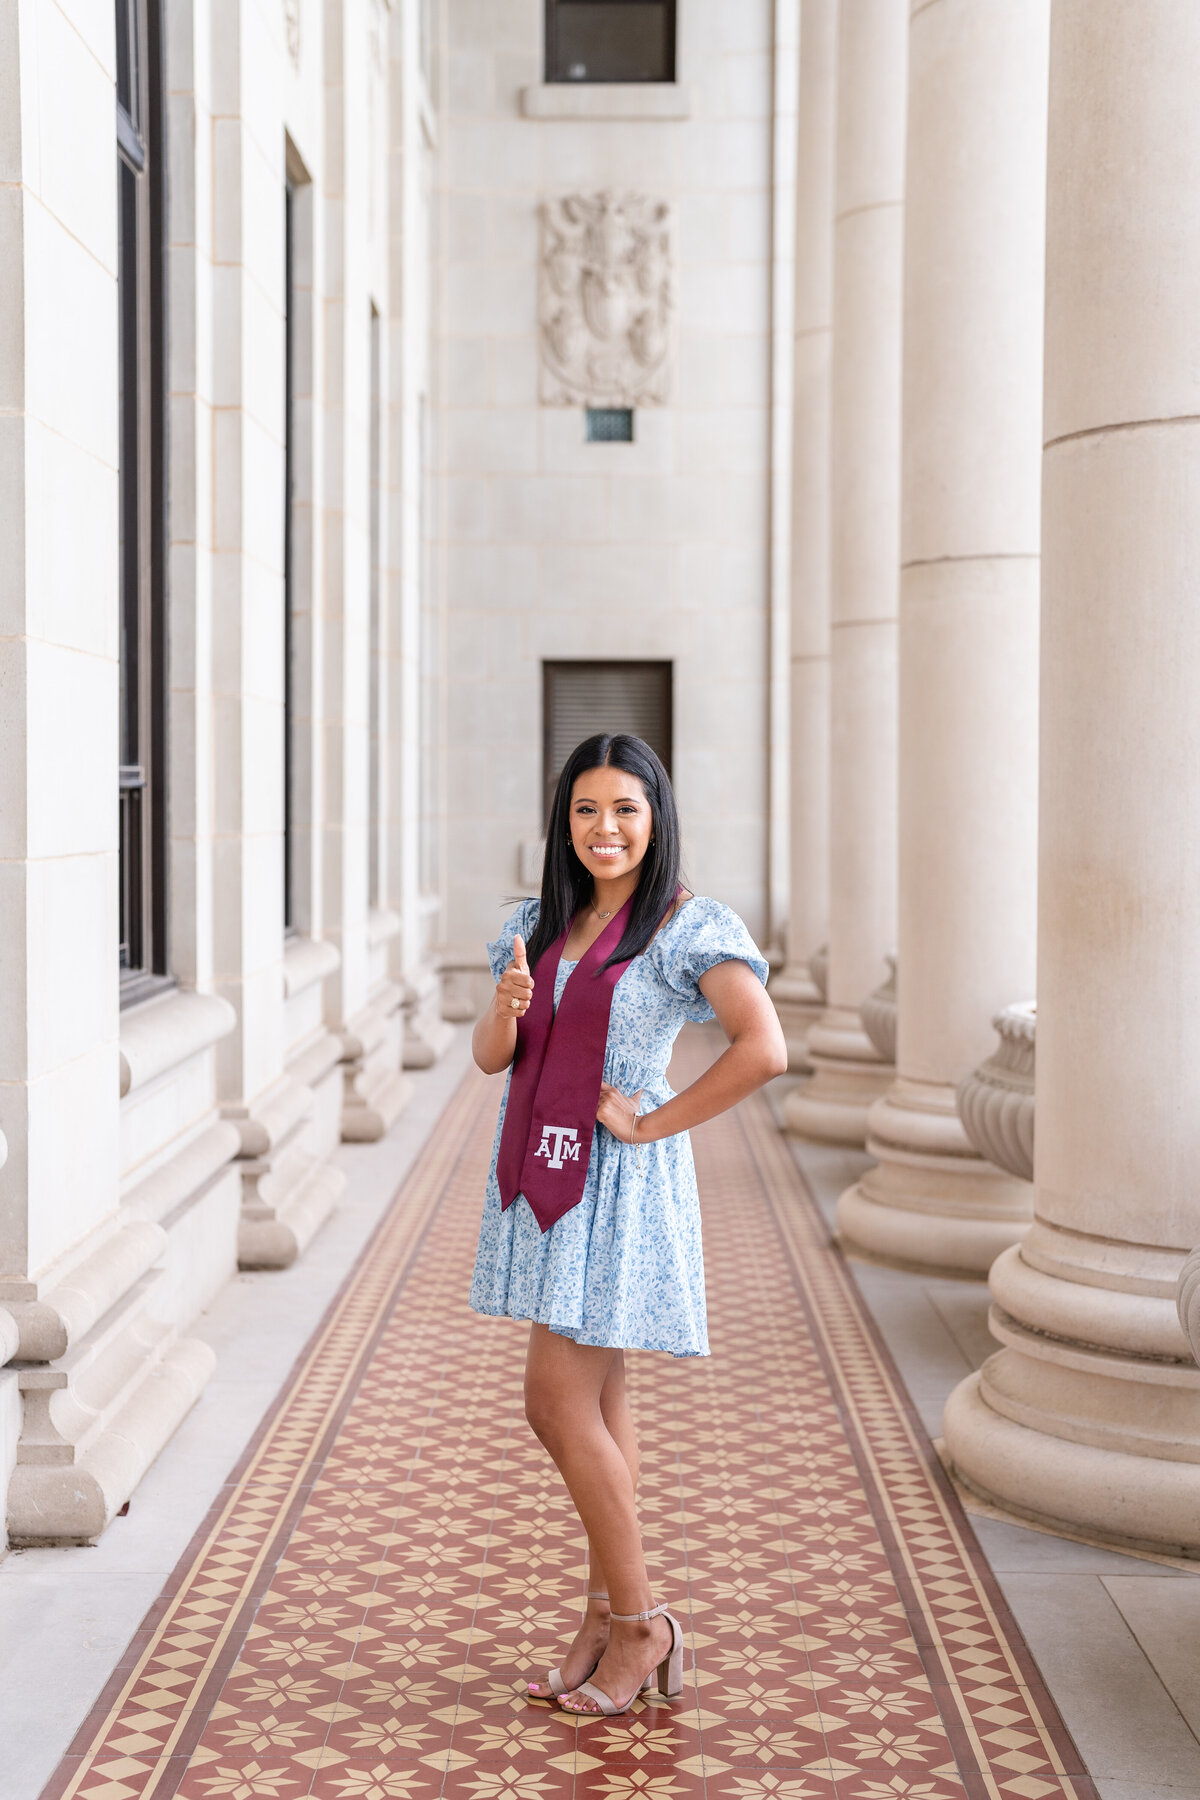 Texas A&M senior girl standing with hand on hip and thumbs up wearing blue dress and maroon stole in columns of Administration Building